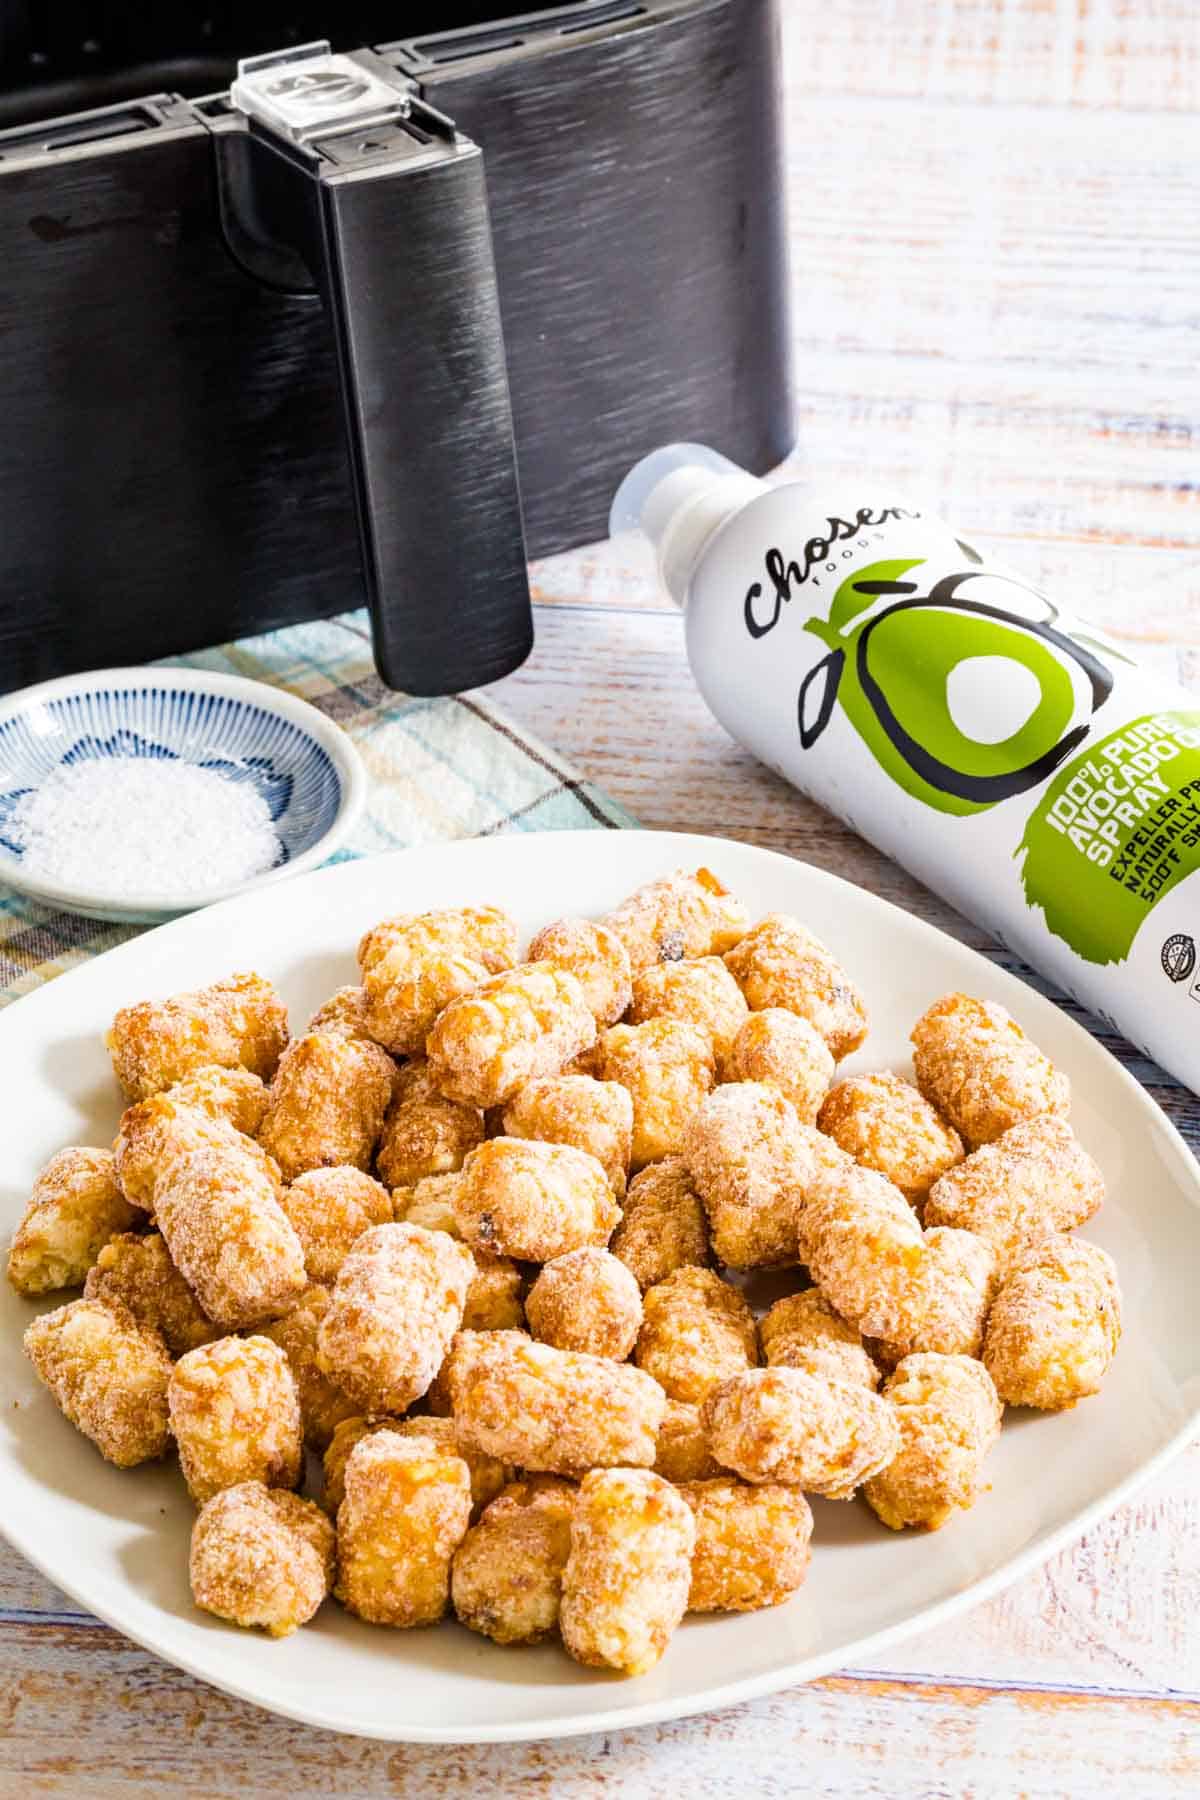 Ingredients for air fryer tater tots are shown: frozen tater tots, oil, and salt.